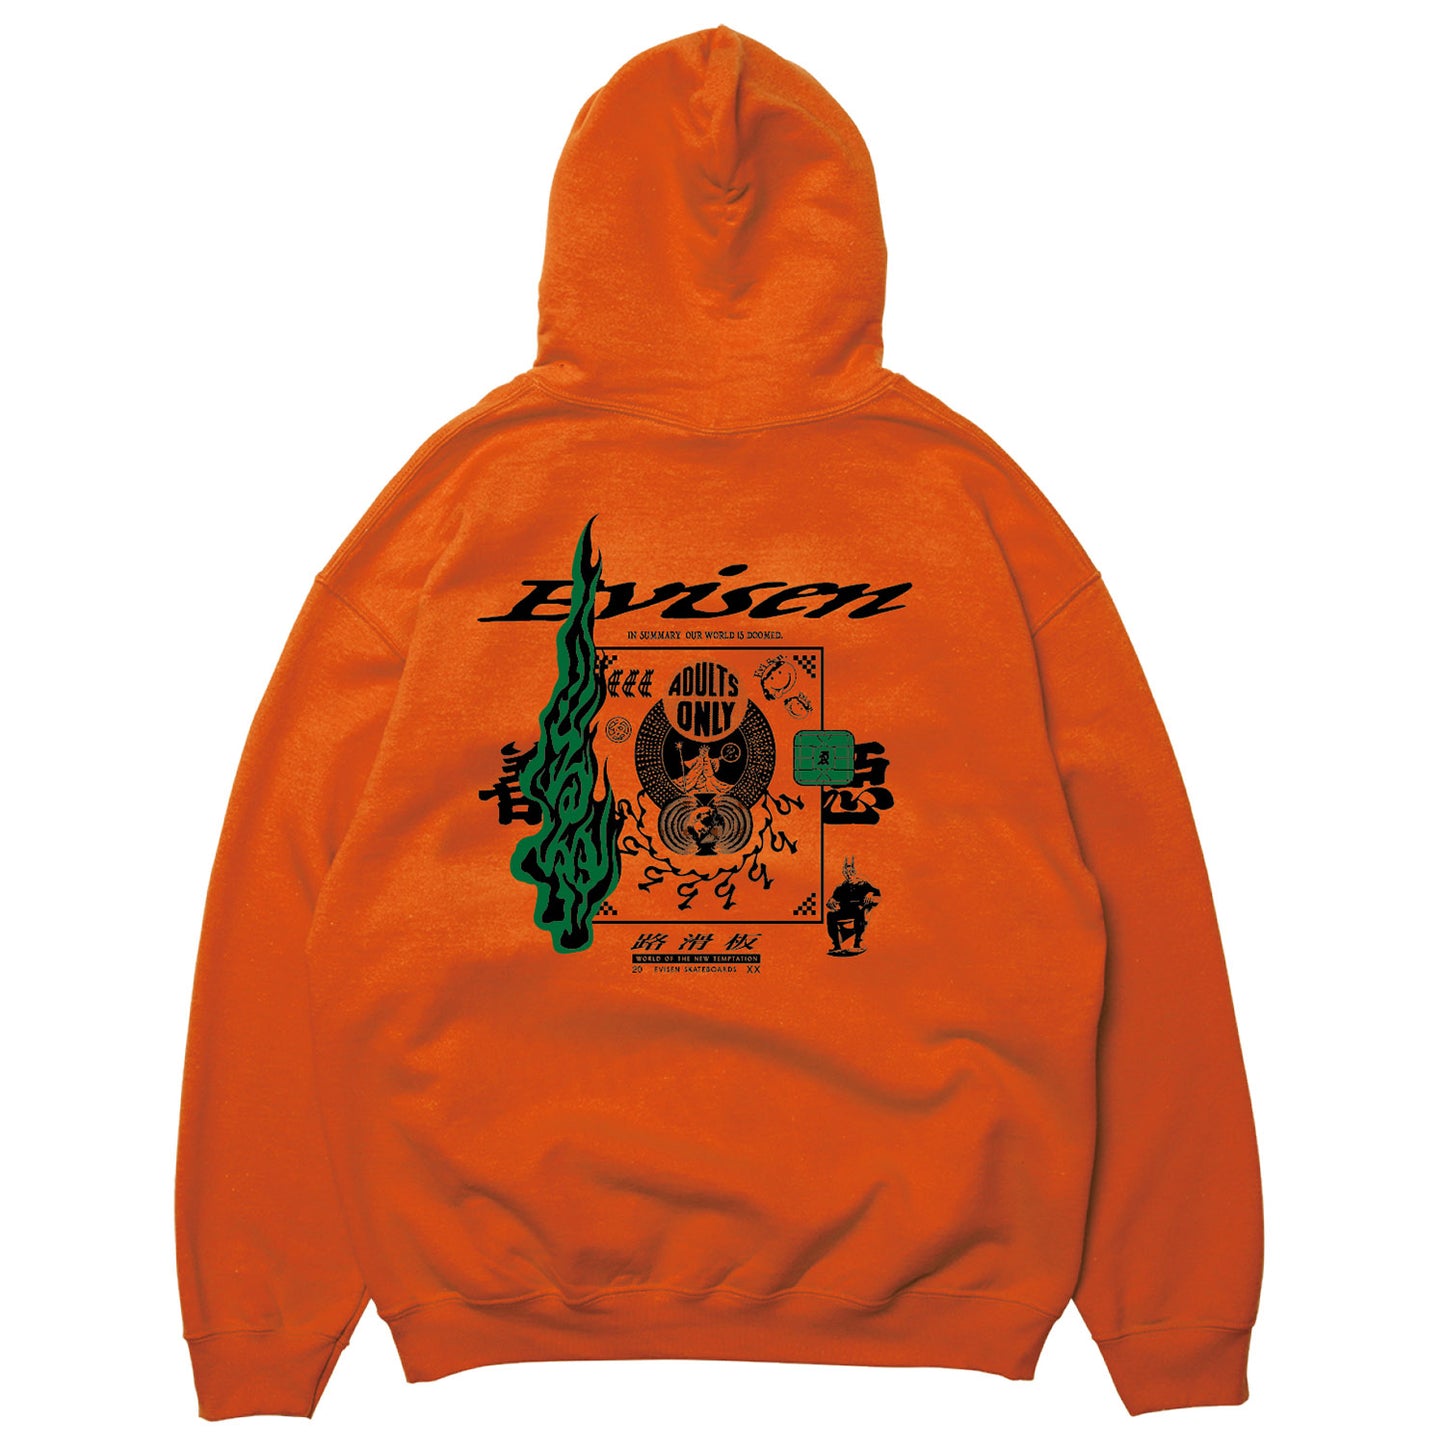 NEO ADULTS ONLY HOODIE - ORANGE